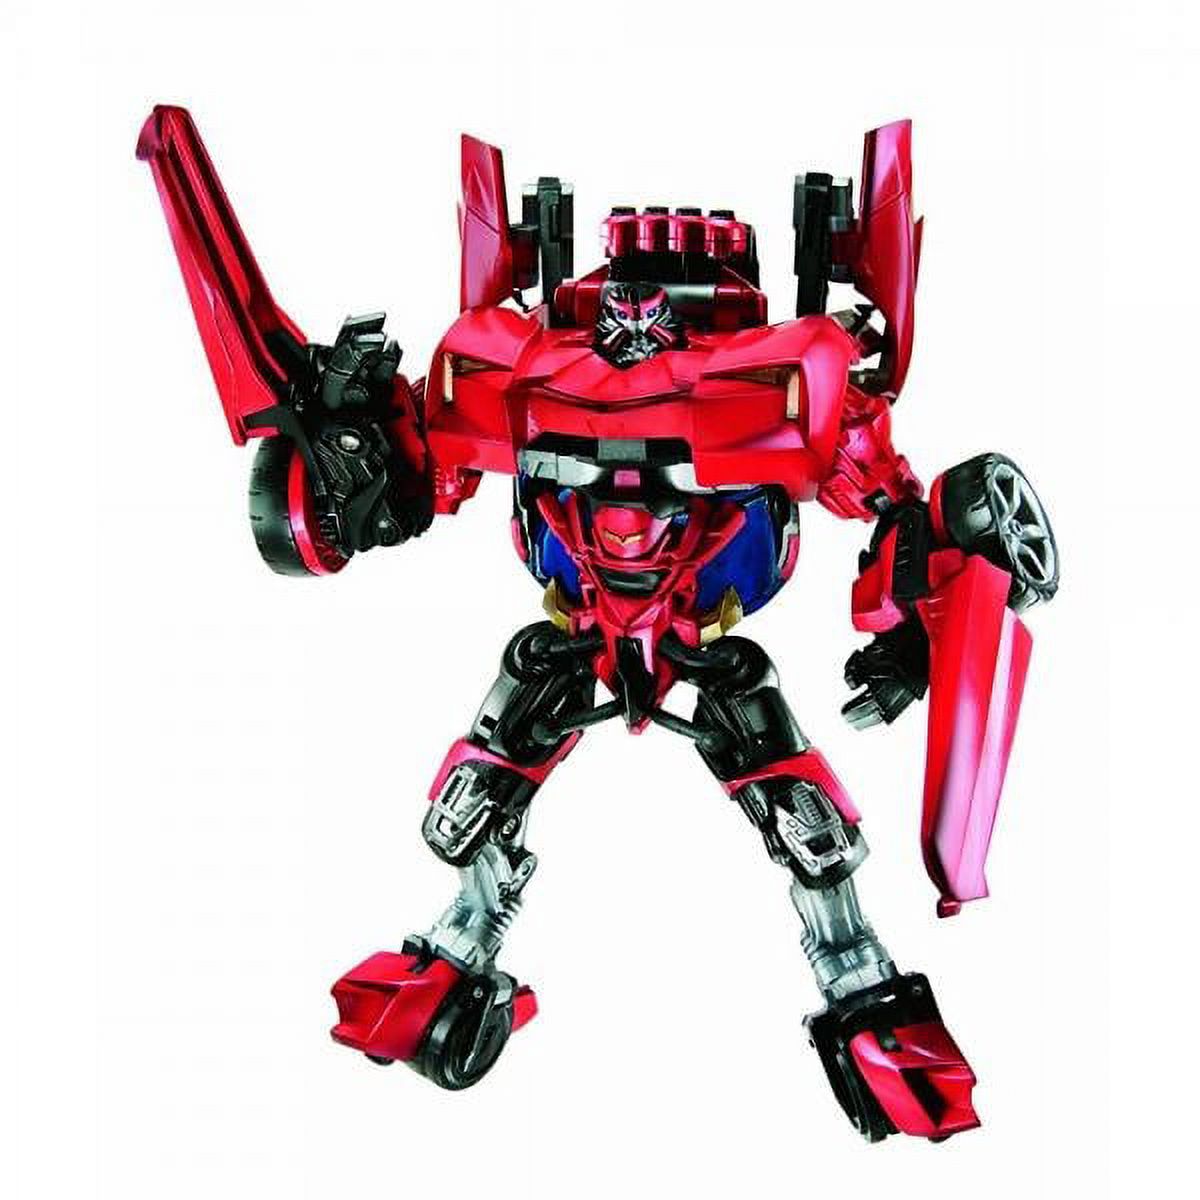 Transformers Revenge of the Fallen Swerve Action Figure - image 1 of 2